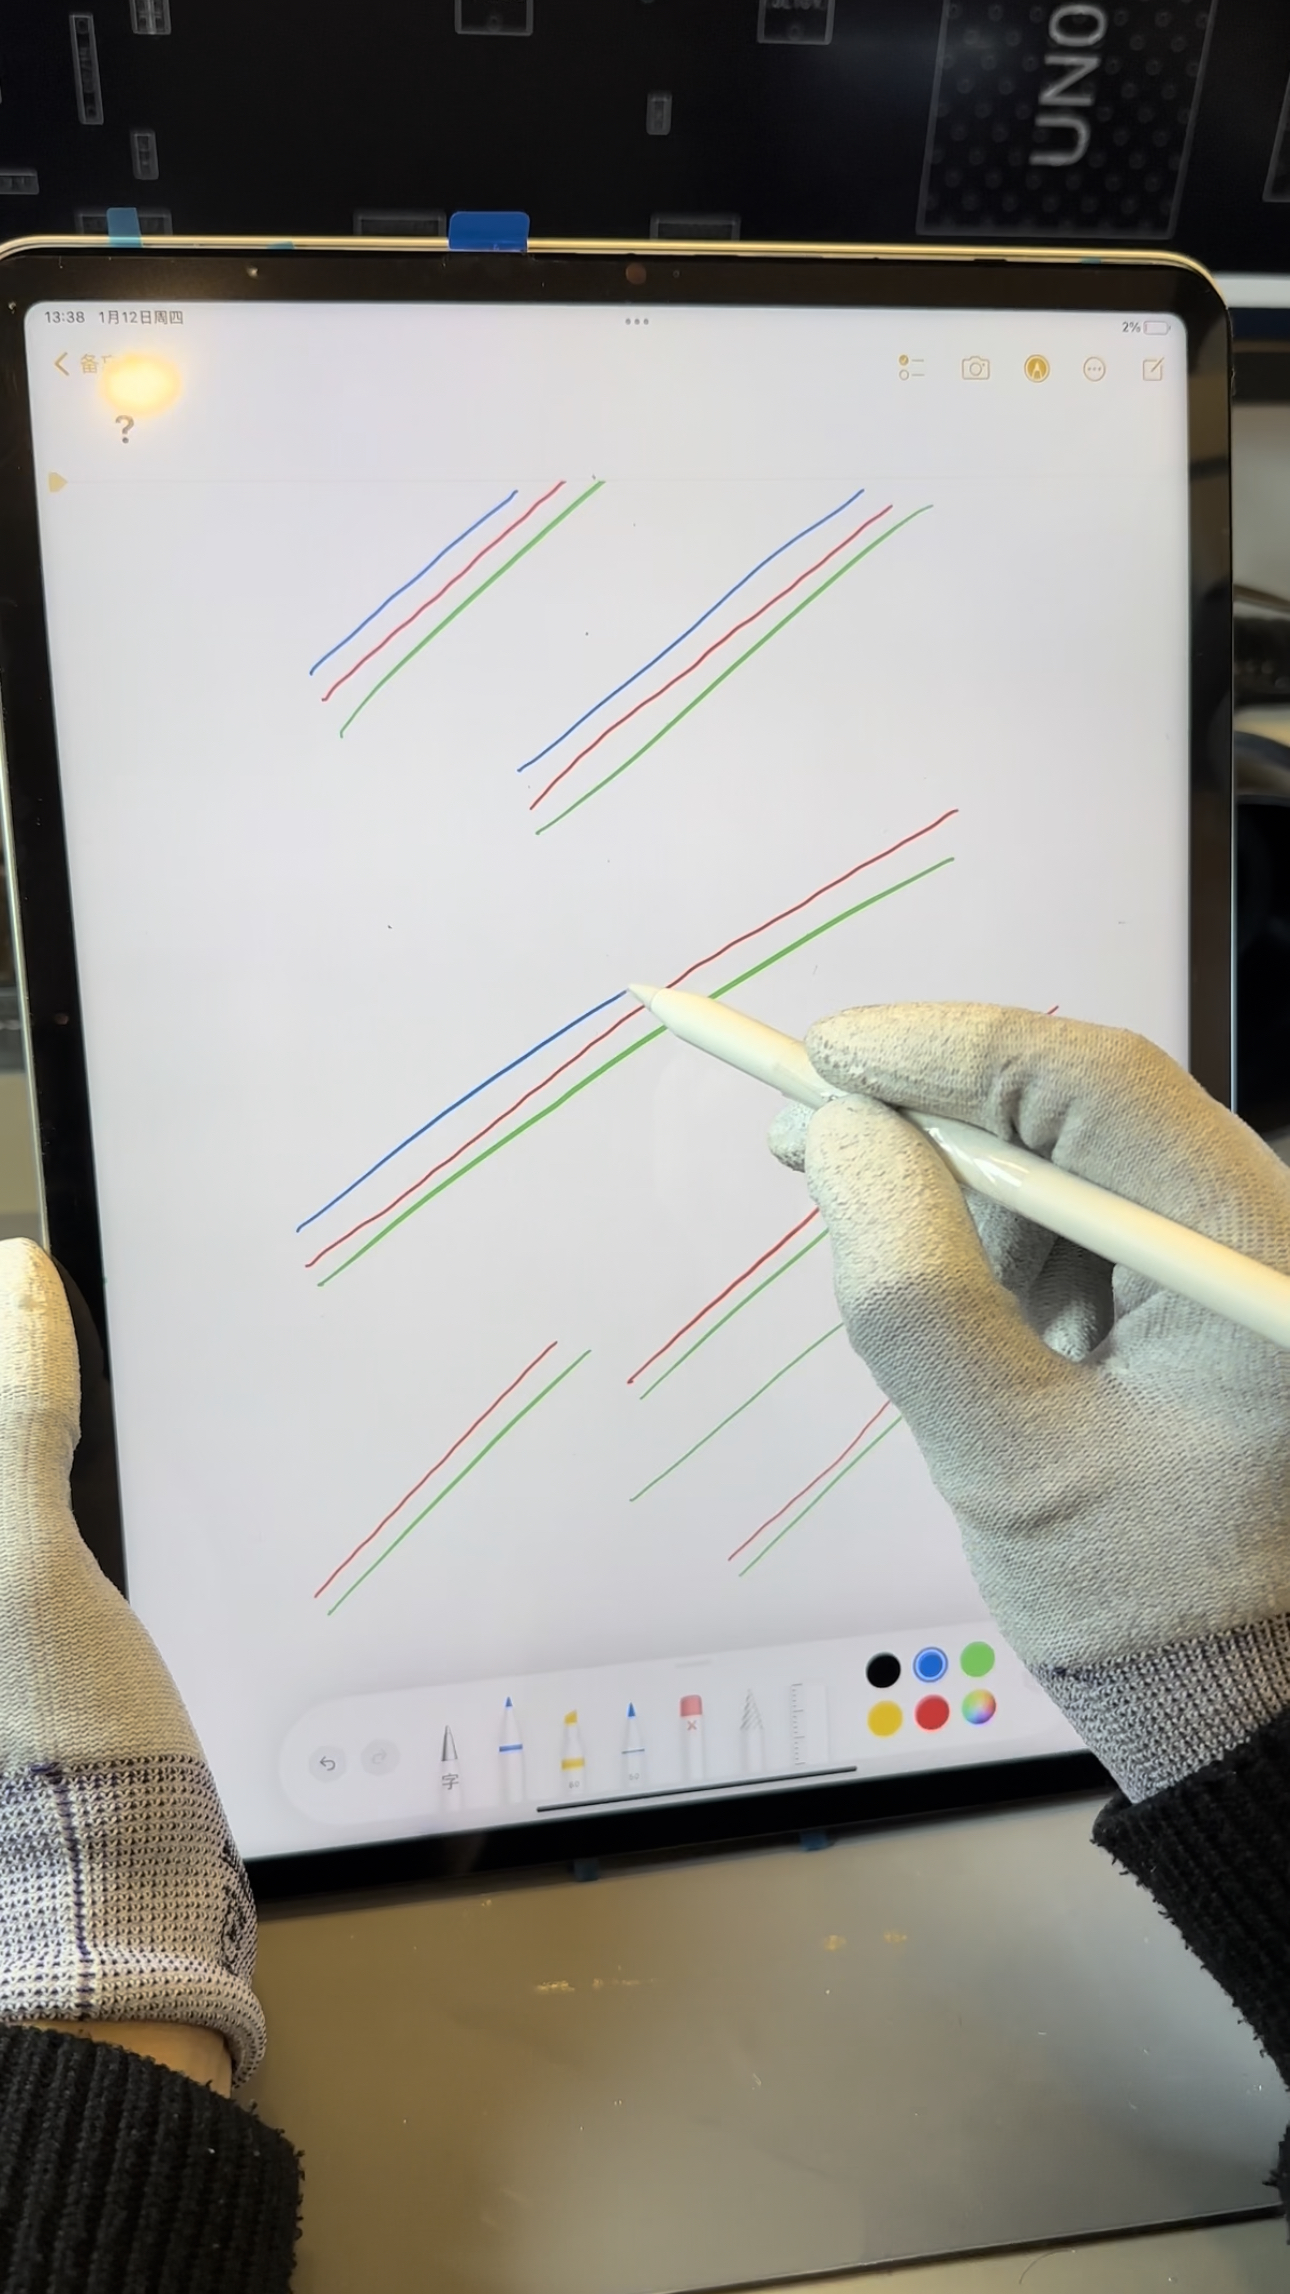 Why Your Apple Pencil Doesn’t Work Properly After an iPad Pro Screen Repair: Unravelling the Mystery